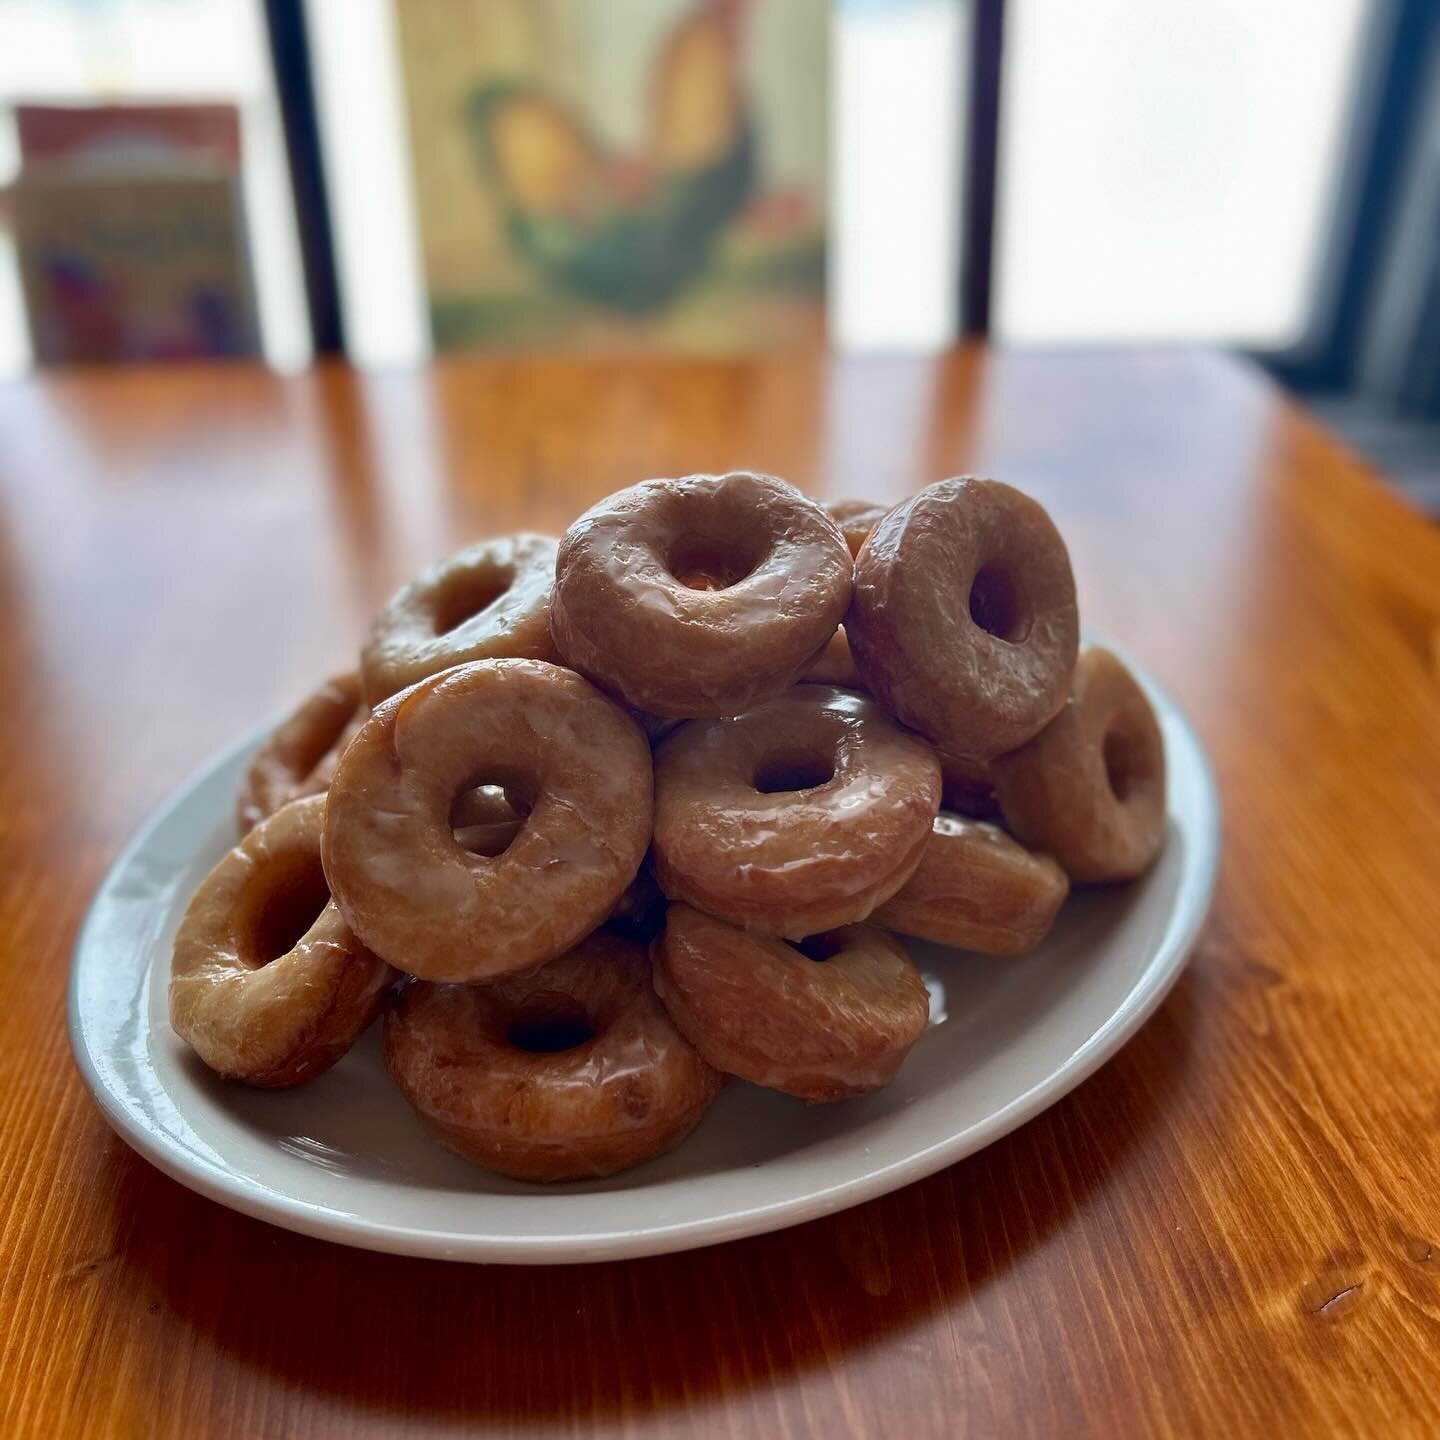 Is it possible to resist fresh homemade mini donuts on a platter? Do not deny yourself pleasure. Join us for brunch every Sunday from 9am- 2pm. Make these donuts your donuts. 
🍩
Brought to you by the talented @hash_slinger_hanzo 
#turnkeymadison #br